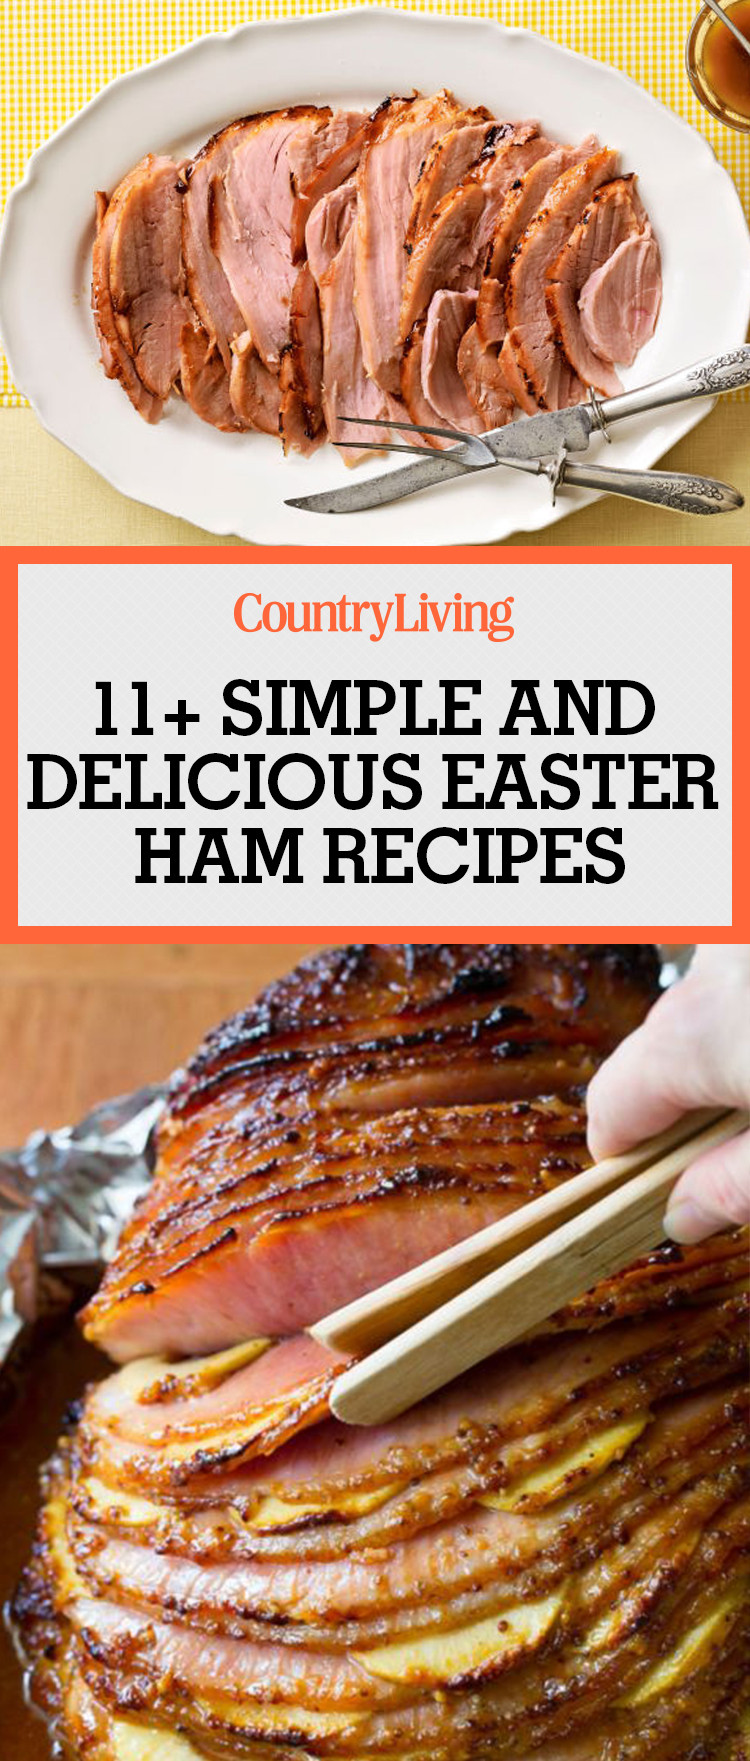 Best Ham Recipes For Easter
 11 Best Easter Ham Recipes How to Make an Easter Ham